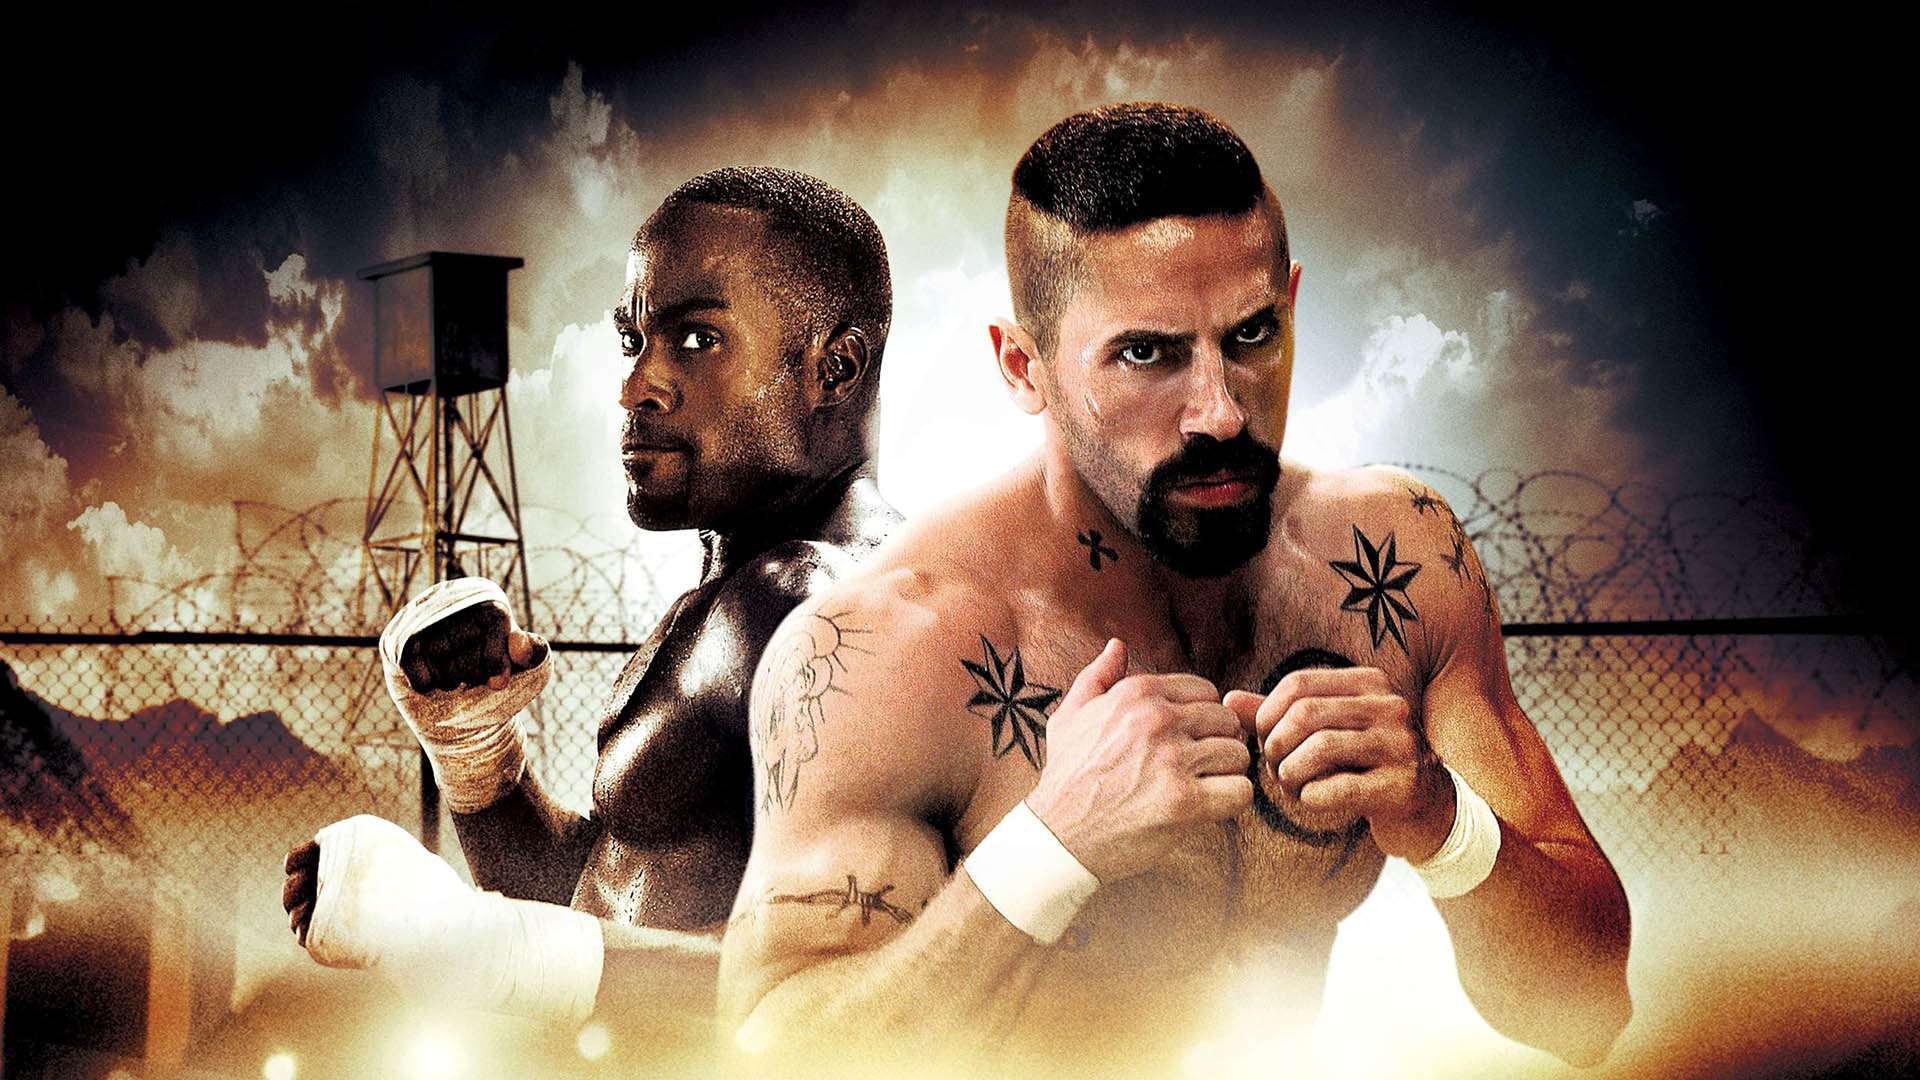 Cover of Undisputed 3: Redemption starring Boyka